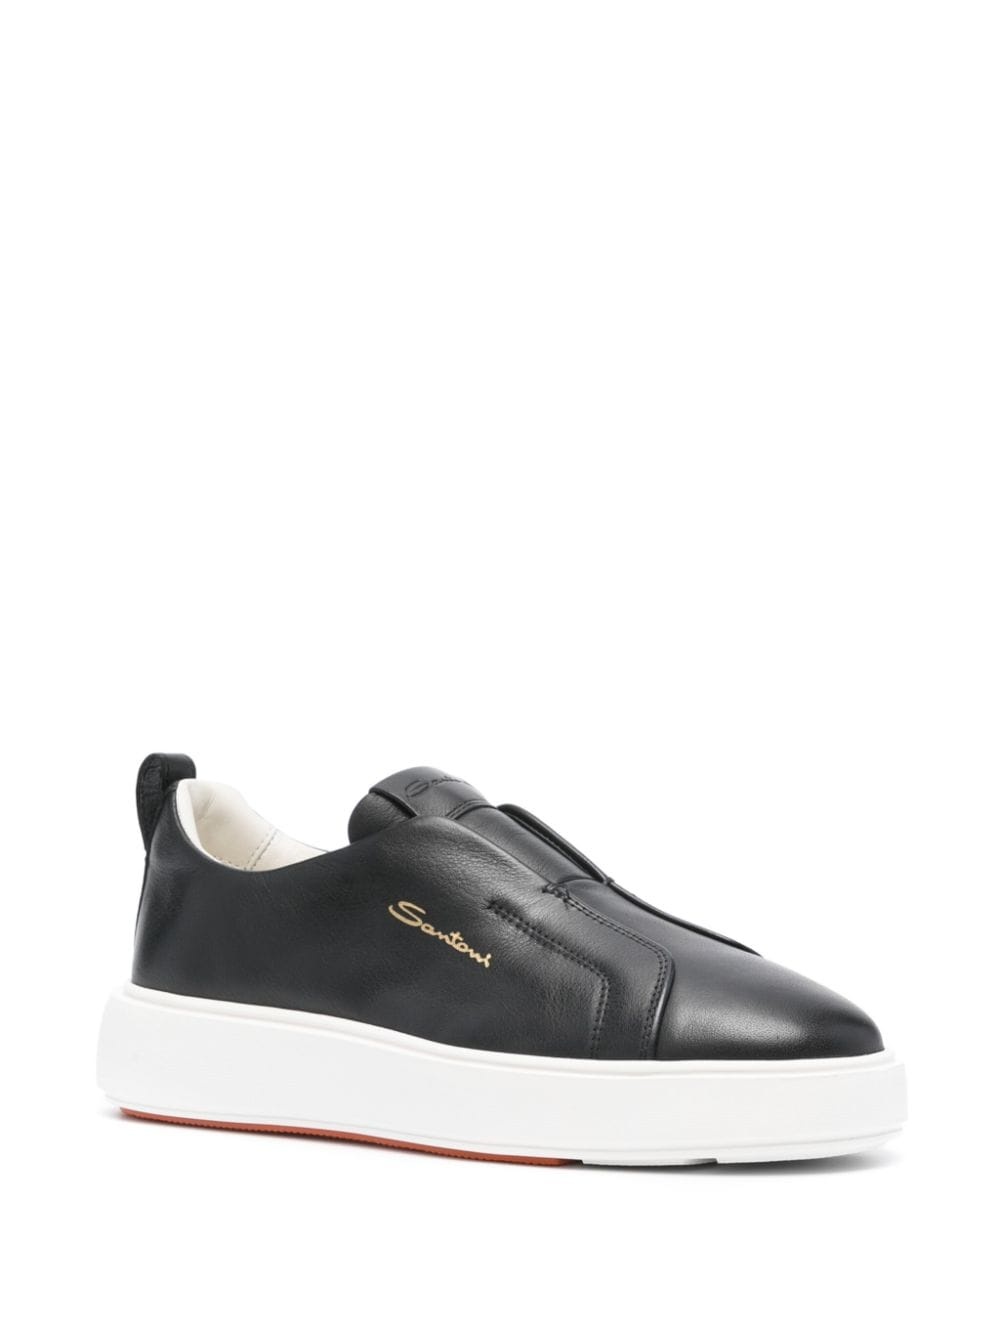 slip-on leather sneakers - 2